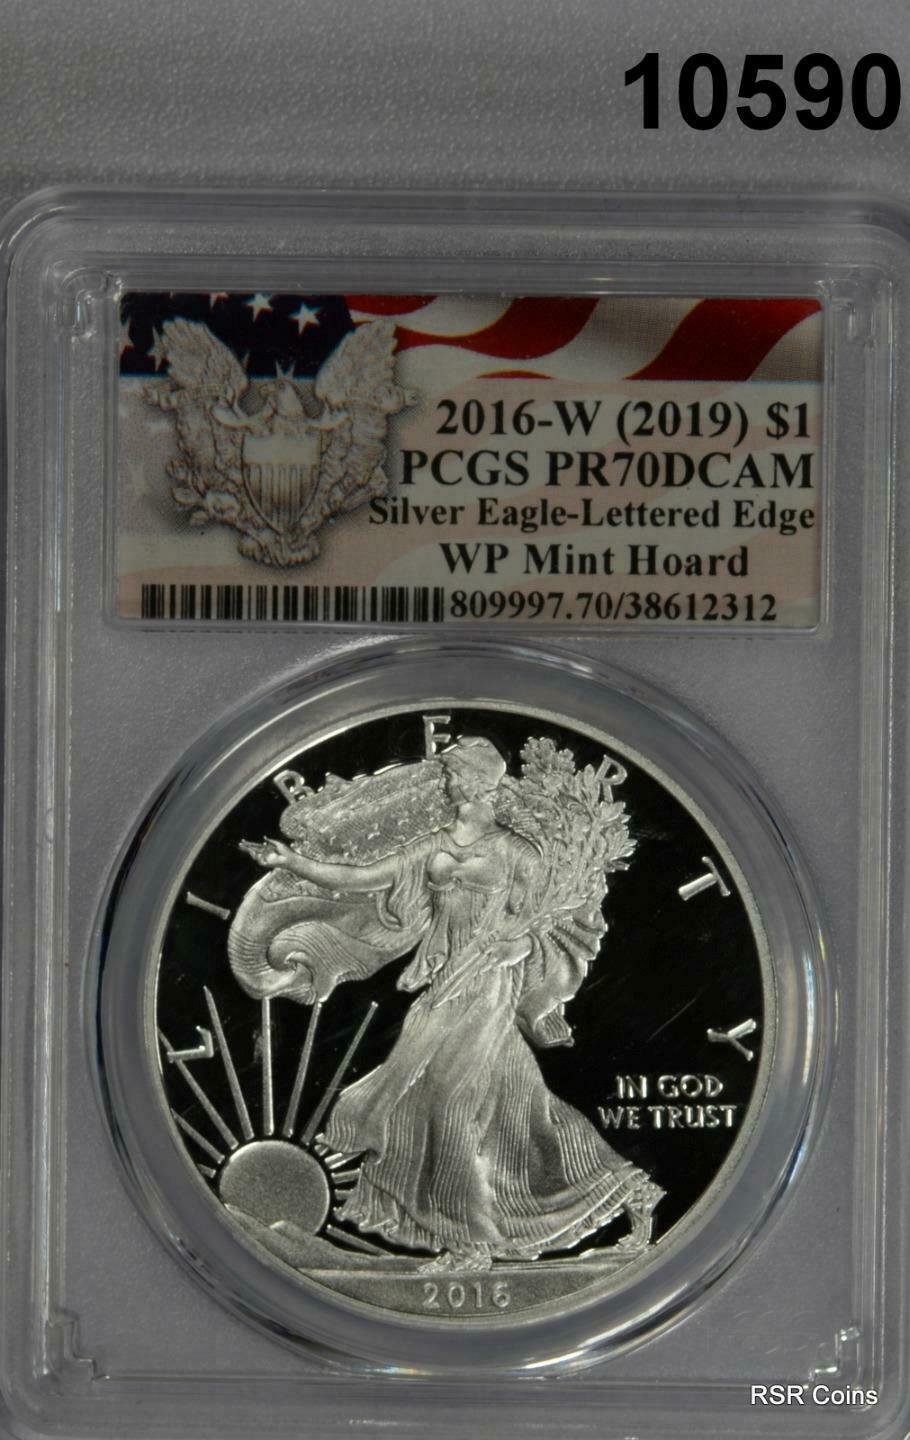 2016 W (2019) SILVER EAGLE FIRST STRIKE PCGS CERTIFIED PR70 DCAM PERFECT! #10590